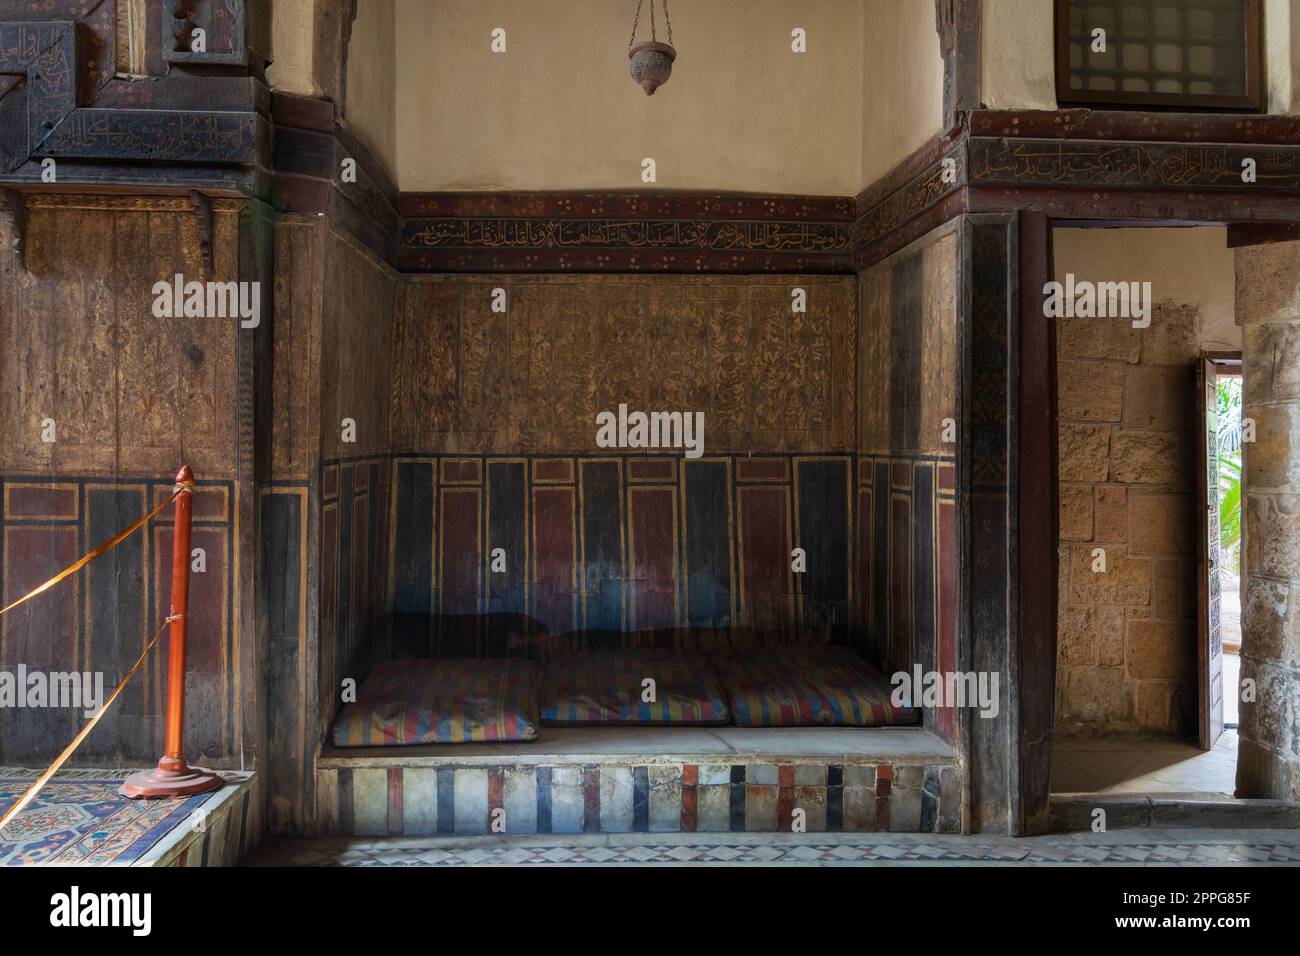 Built-in bench - couch - at historical ottoman era El Sehemy house, Cairo, Egypt Stock Photo